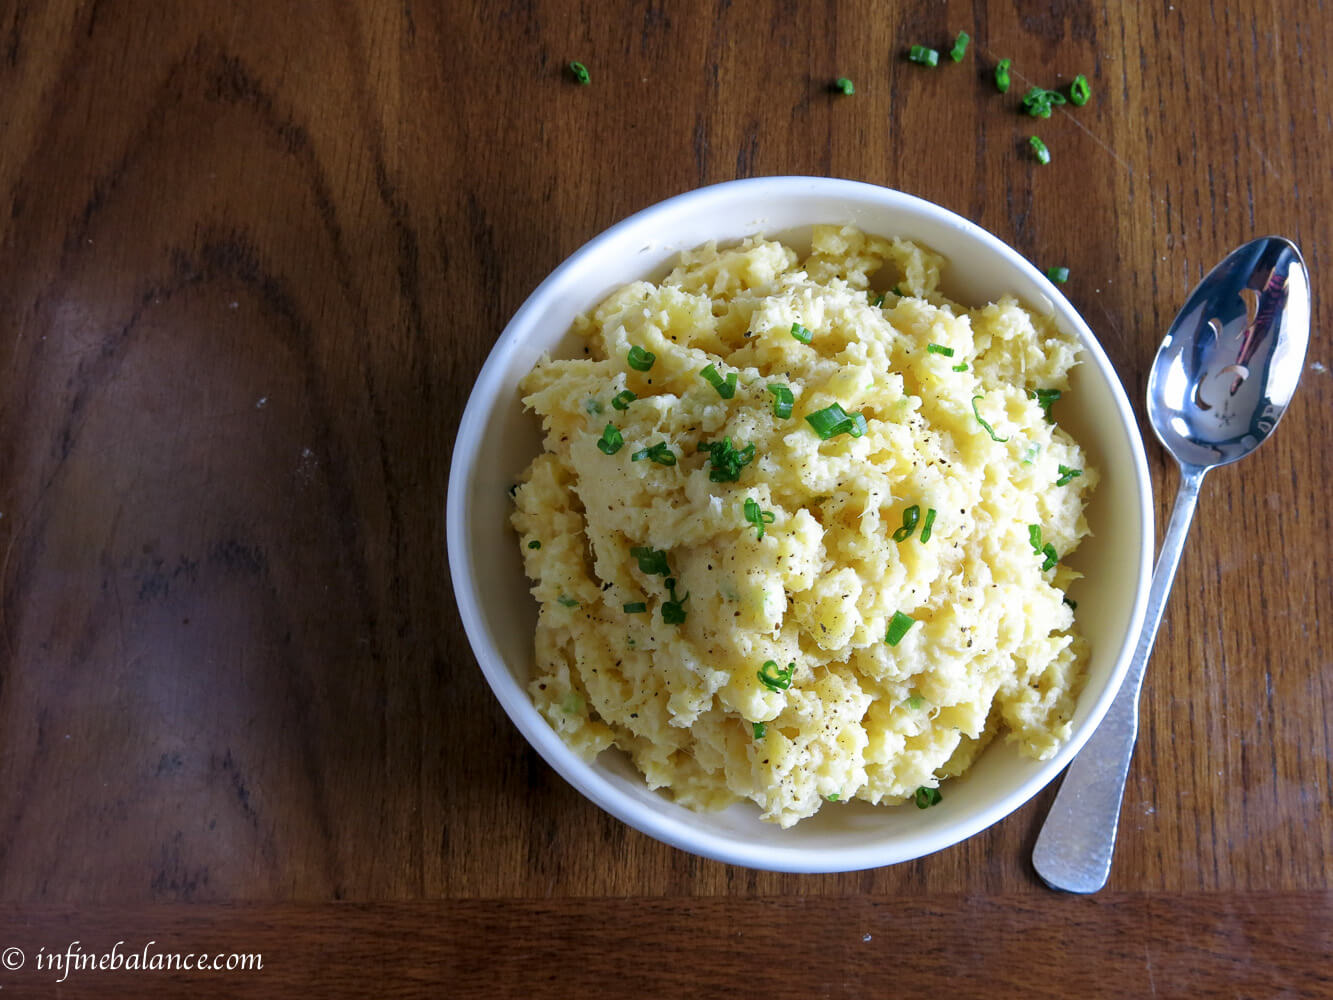 mashed rutabaga with nutmeg and chives